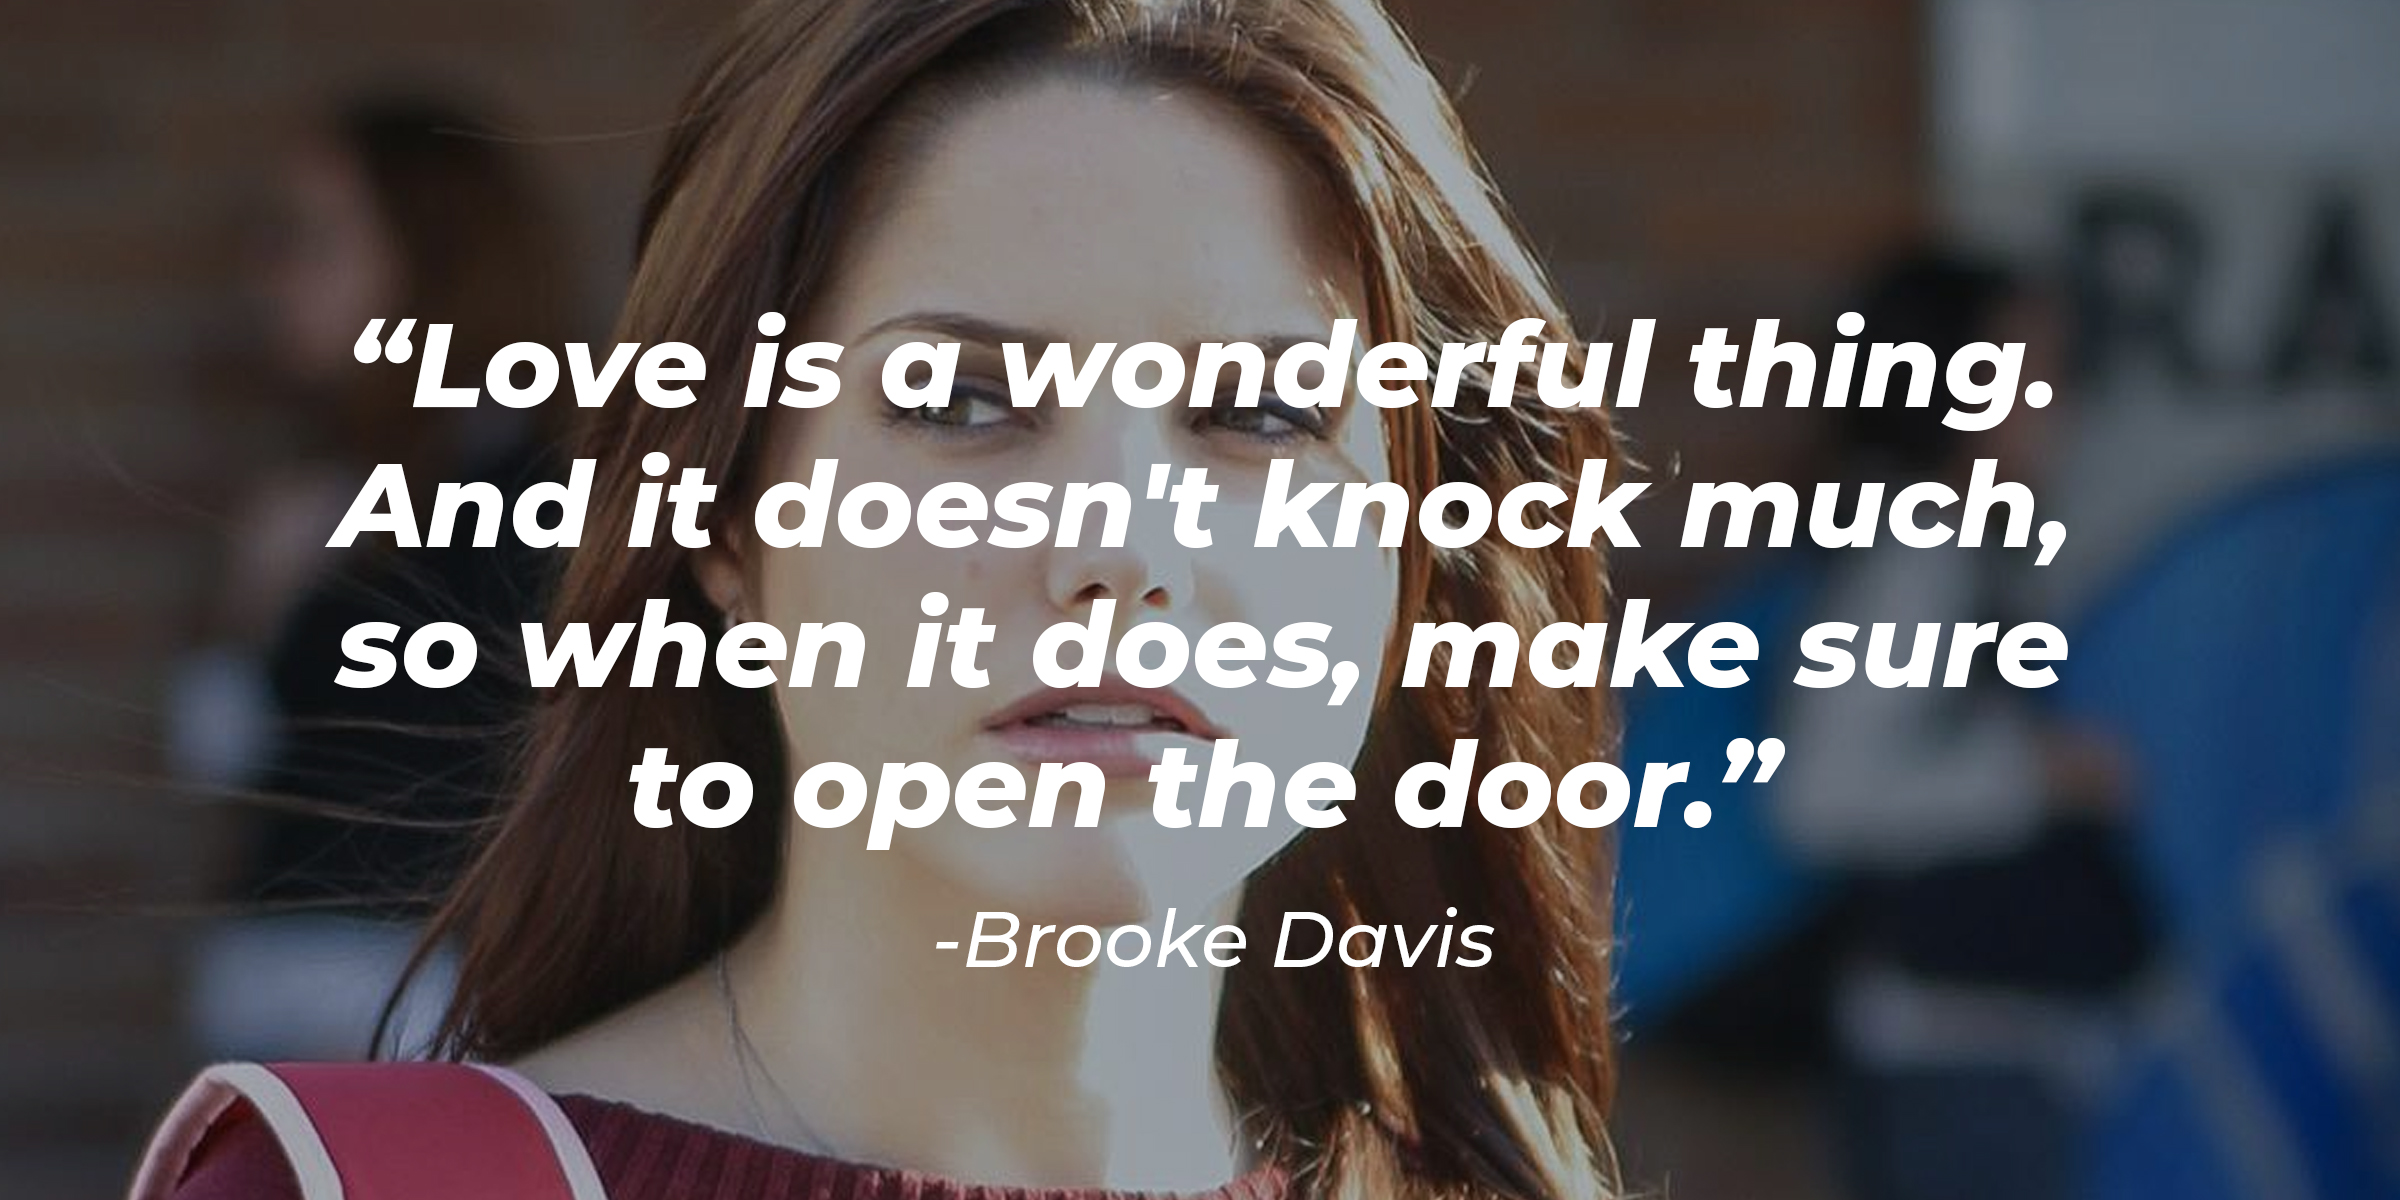 Brooke Davis with her quote, "Love is a wonderful thing. And it doesn't knock much, so when it does, make sure to open the door." | Source: Facebook/OneTreeHill